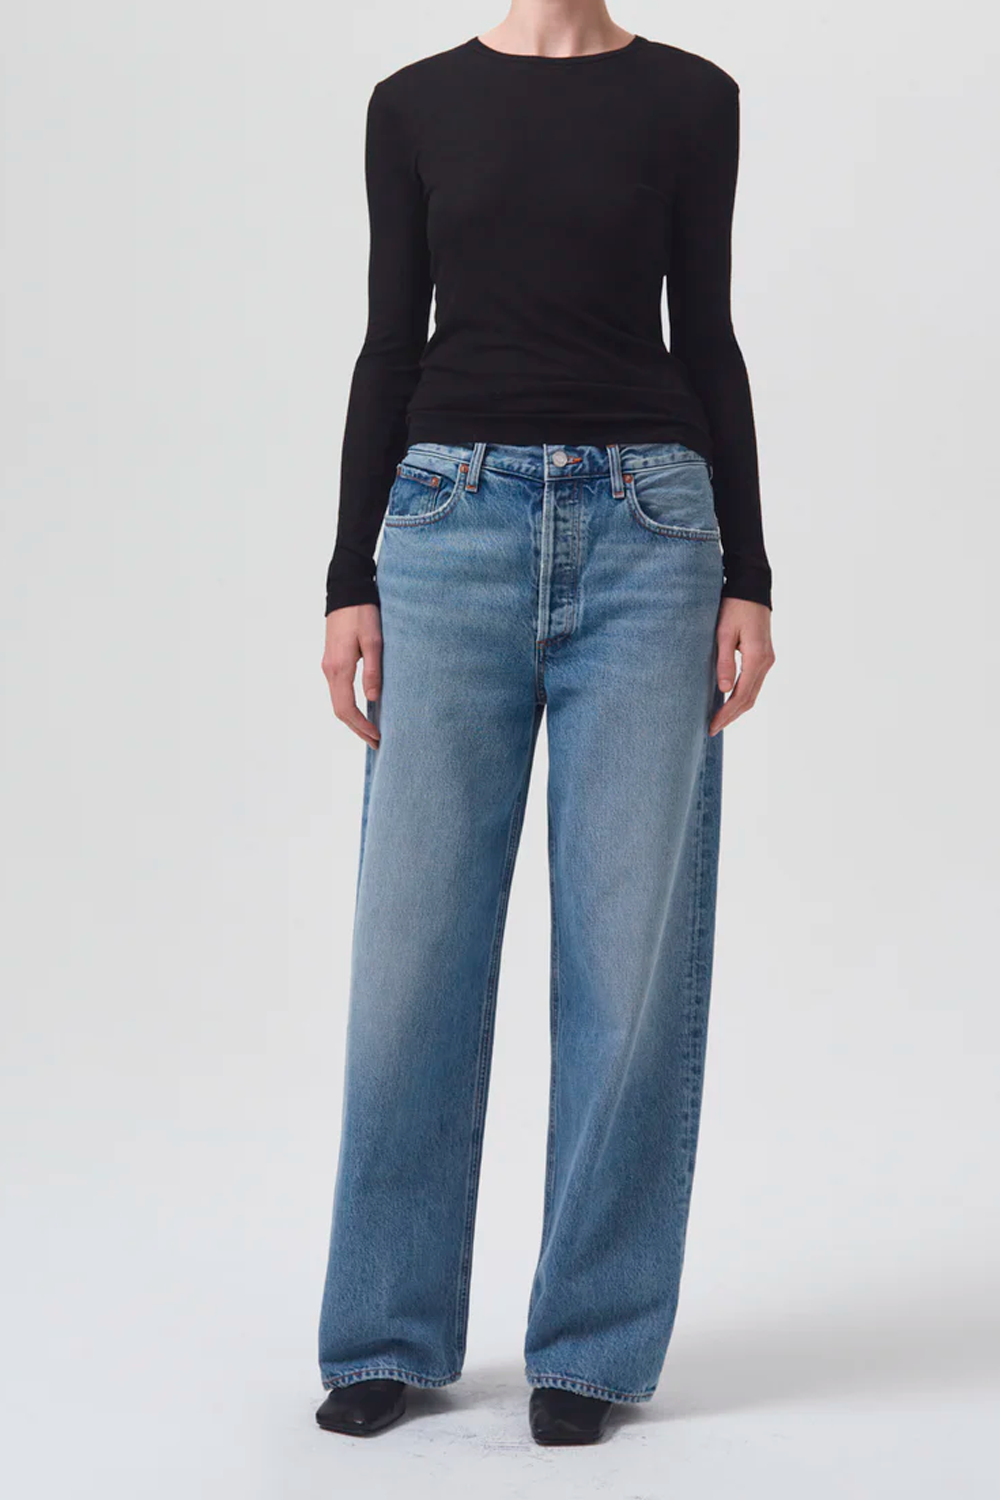 Low Slung Baggy Jeans in Libertine